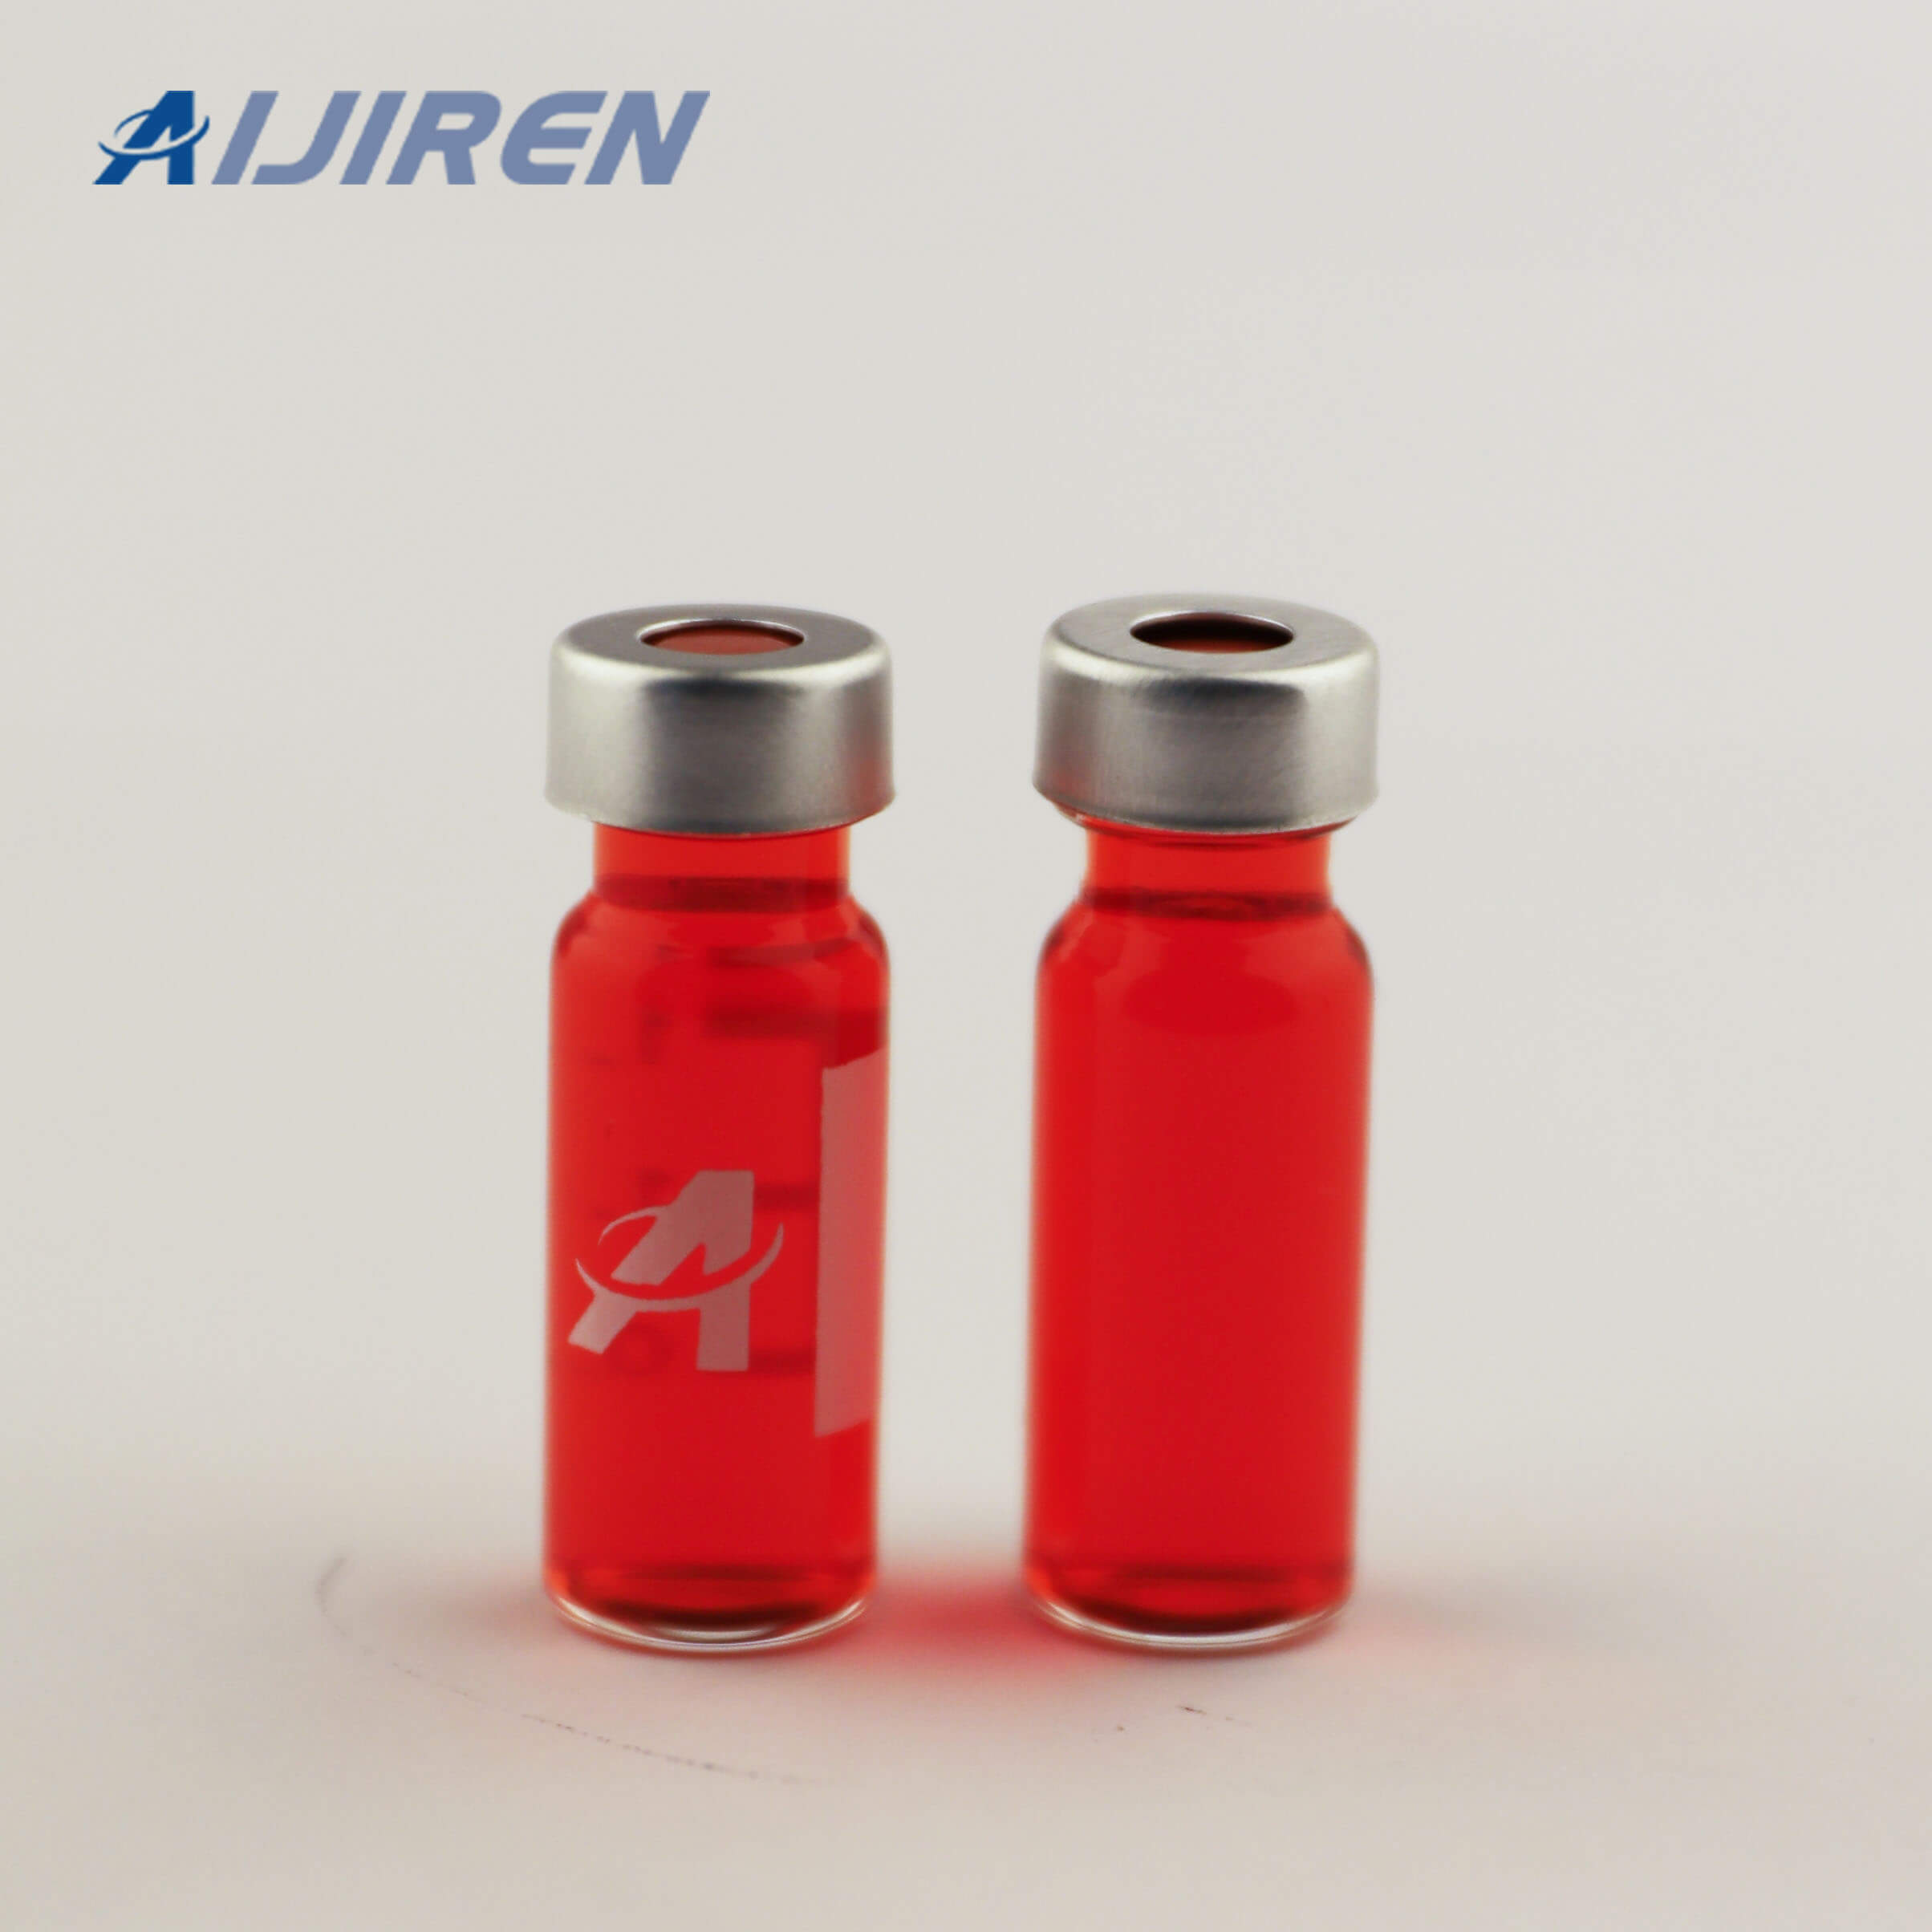 2ml Crimp Top Glass Vial with Aluminum Cap for THERMO FISHER